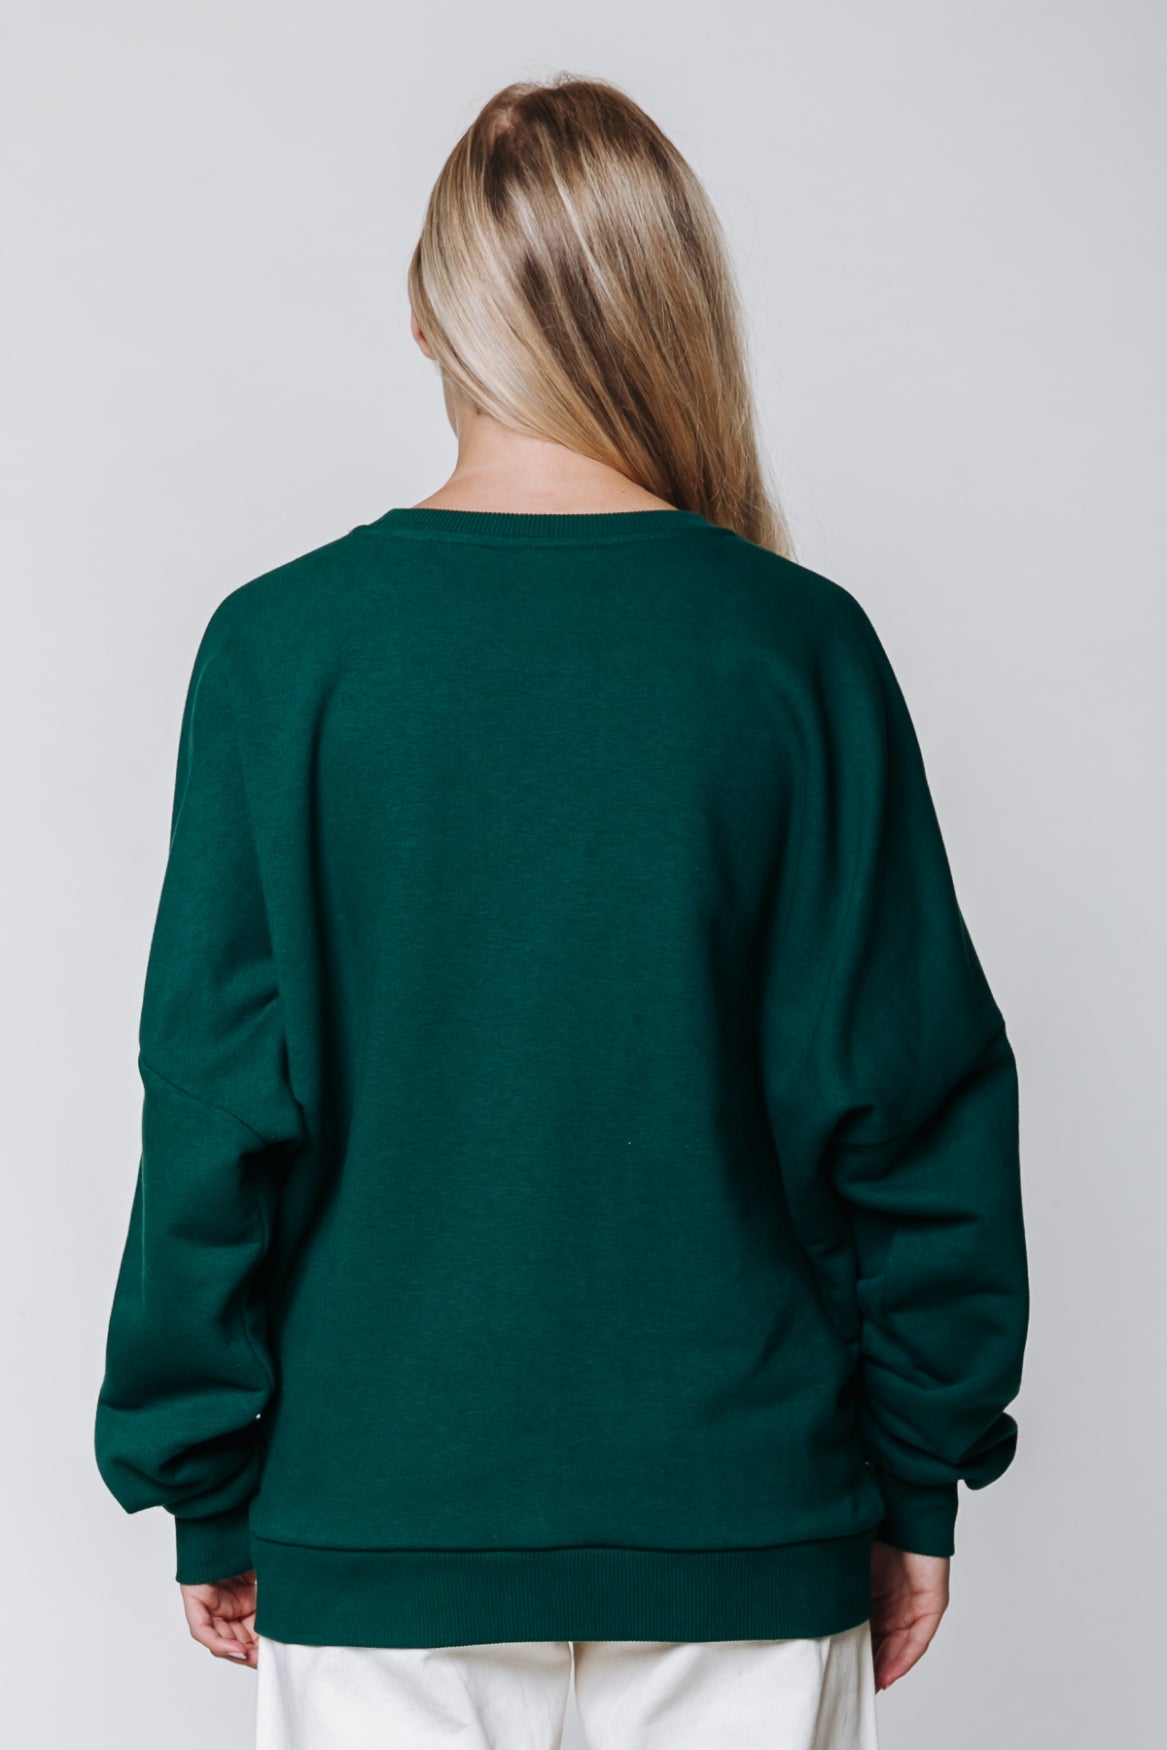 Colourful Rebel CLRFL RBL Sweat | Forest Green 